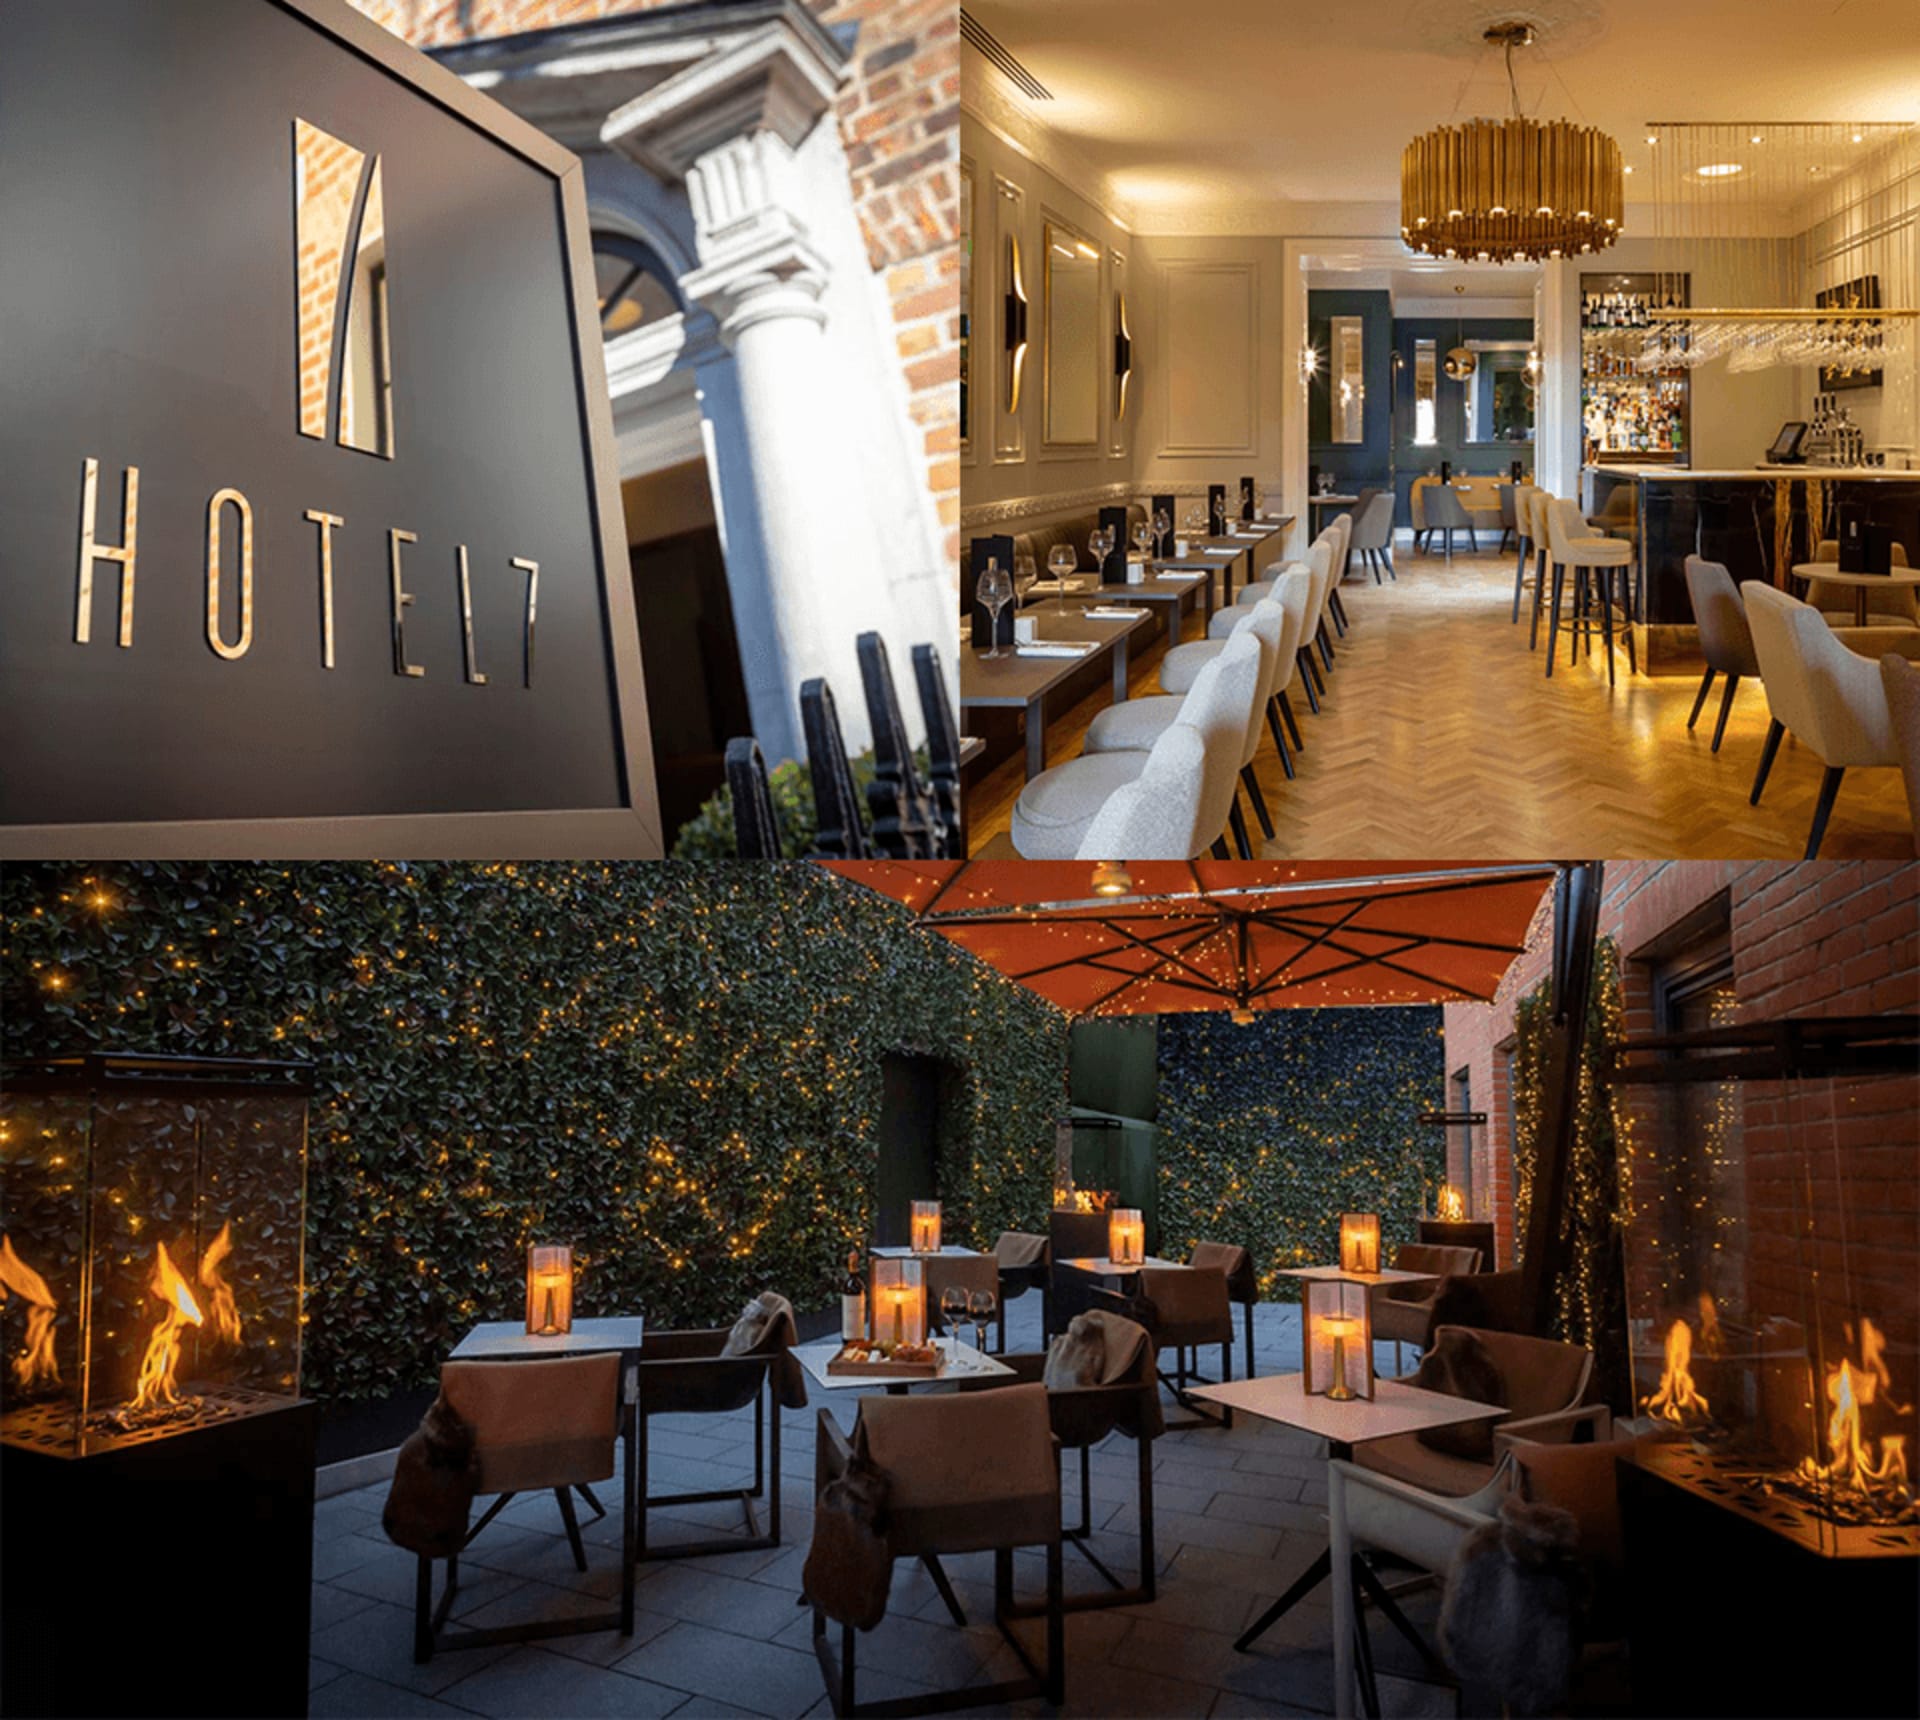 Hotel 7 Entrance, Dining & Bar Area and Outdoor Seating